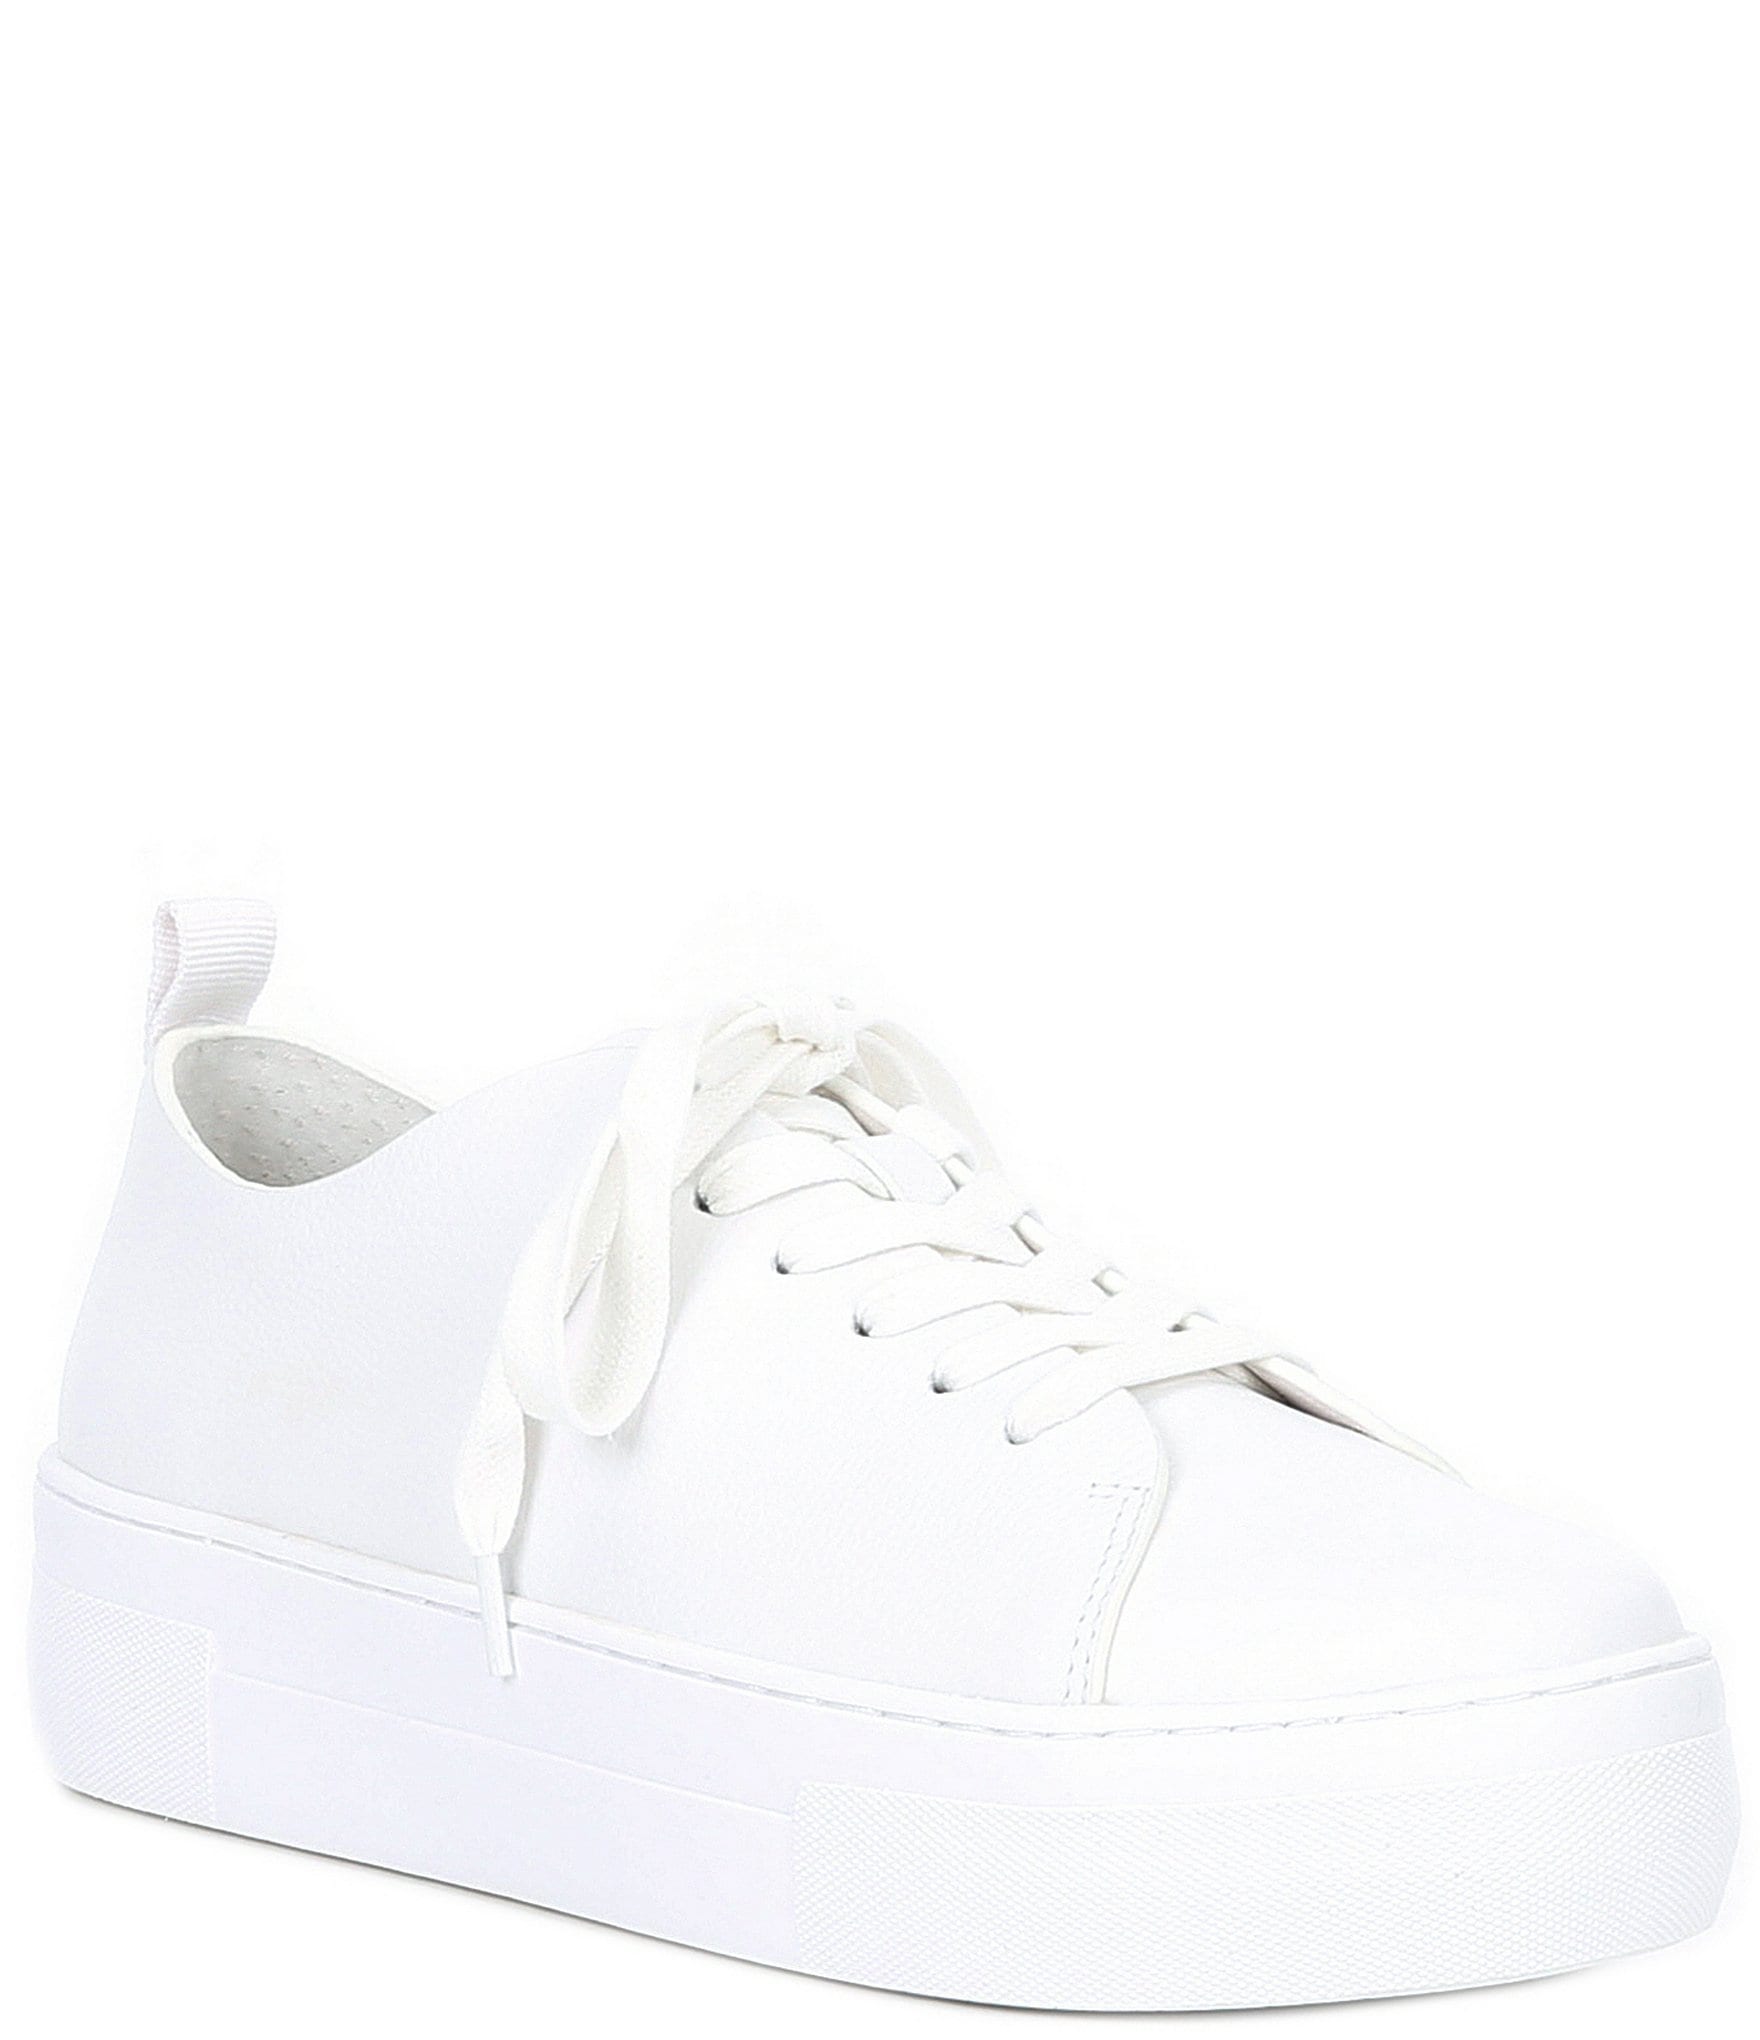 Paul Green 4946-00 White Leather Womens Lace Up Platform Trainers